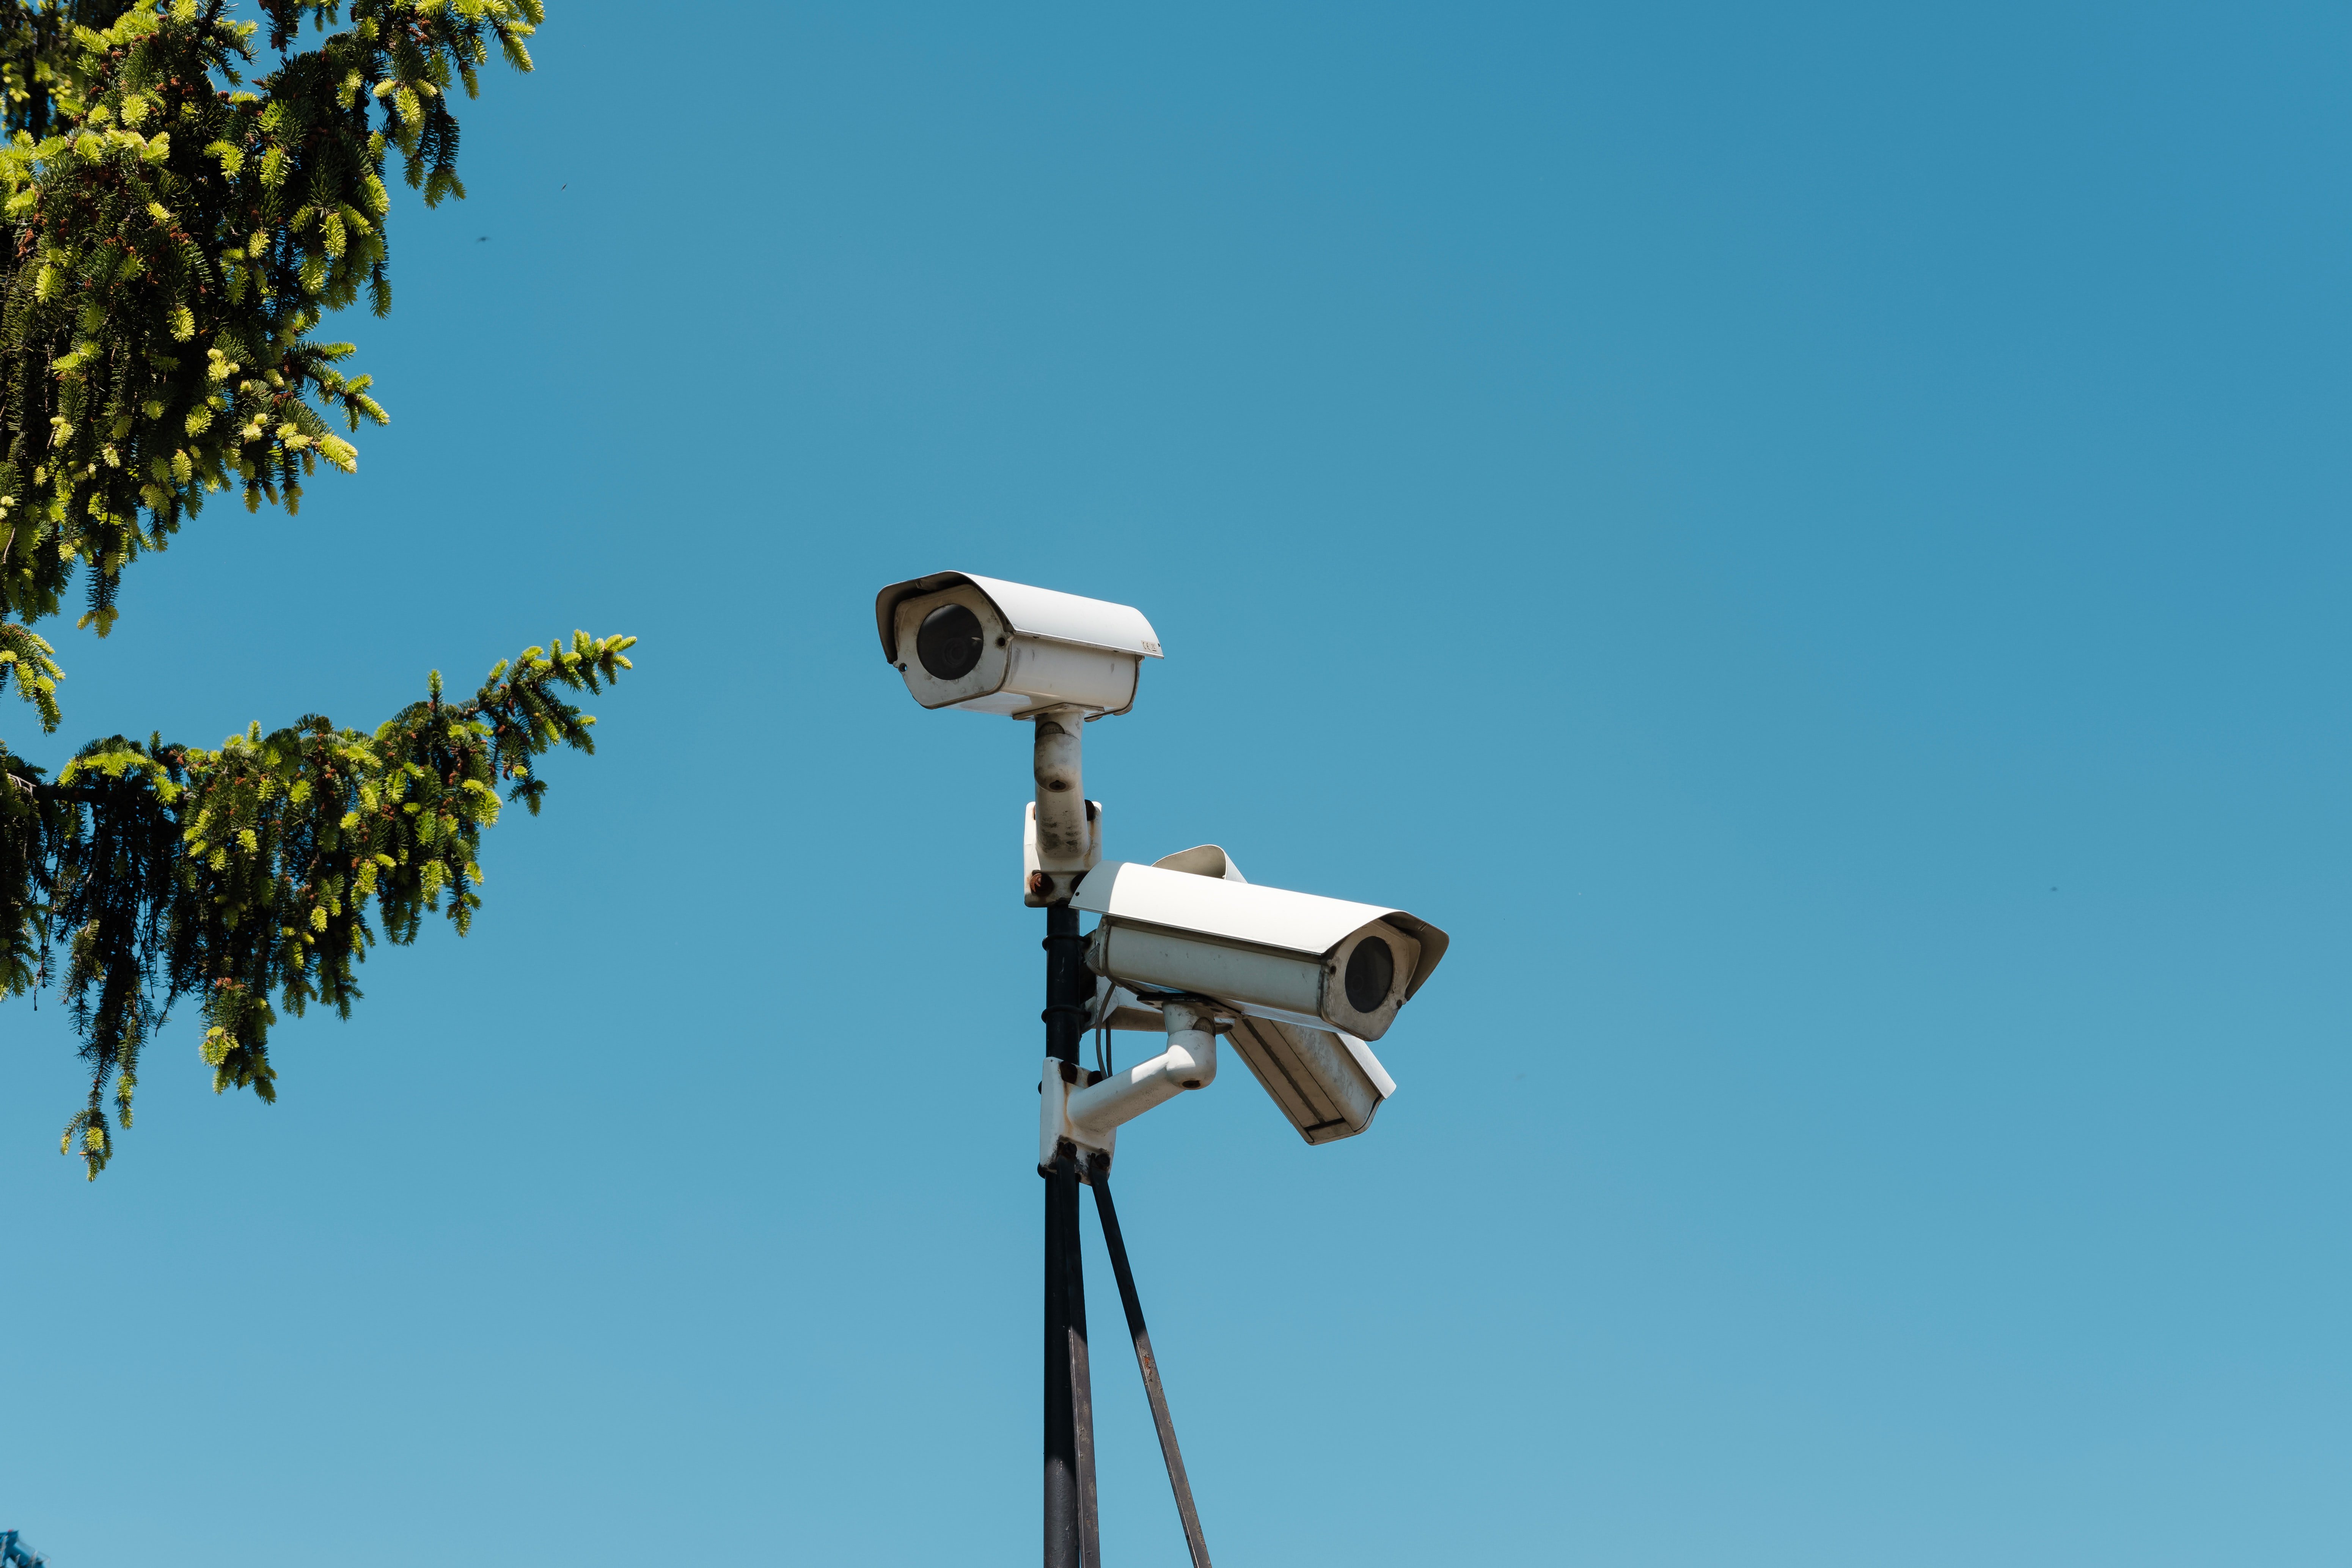 Dolores installed security cameras all around her house | Photo: Unsplash